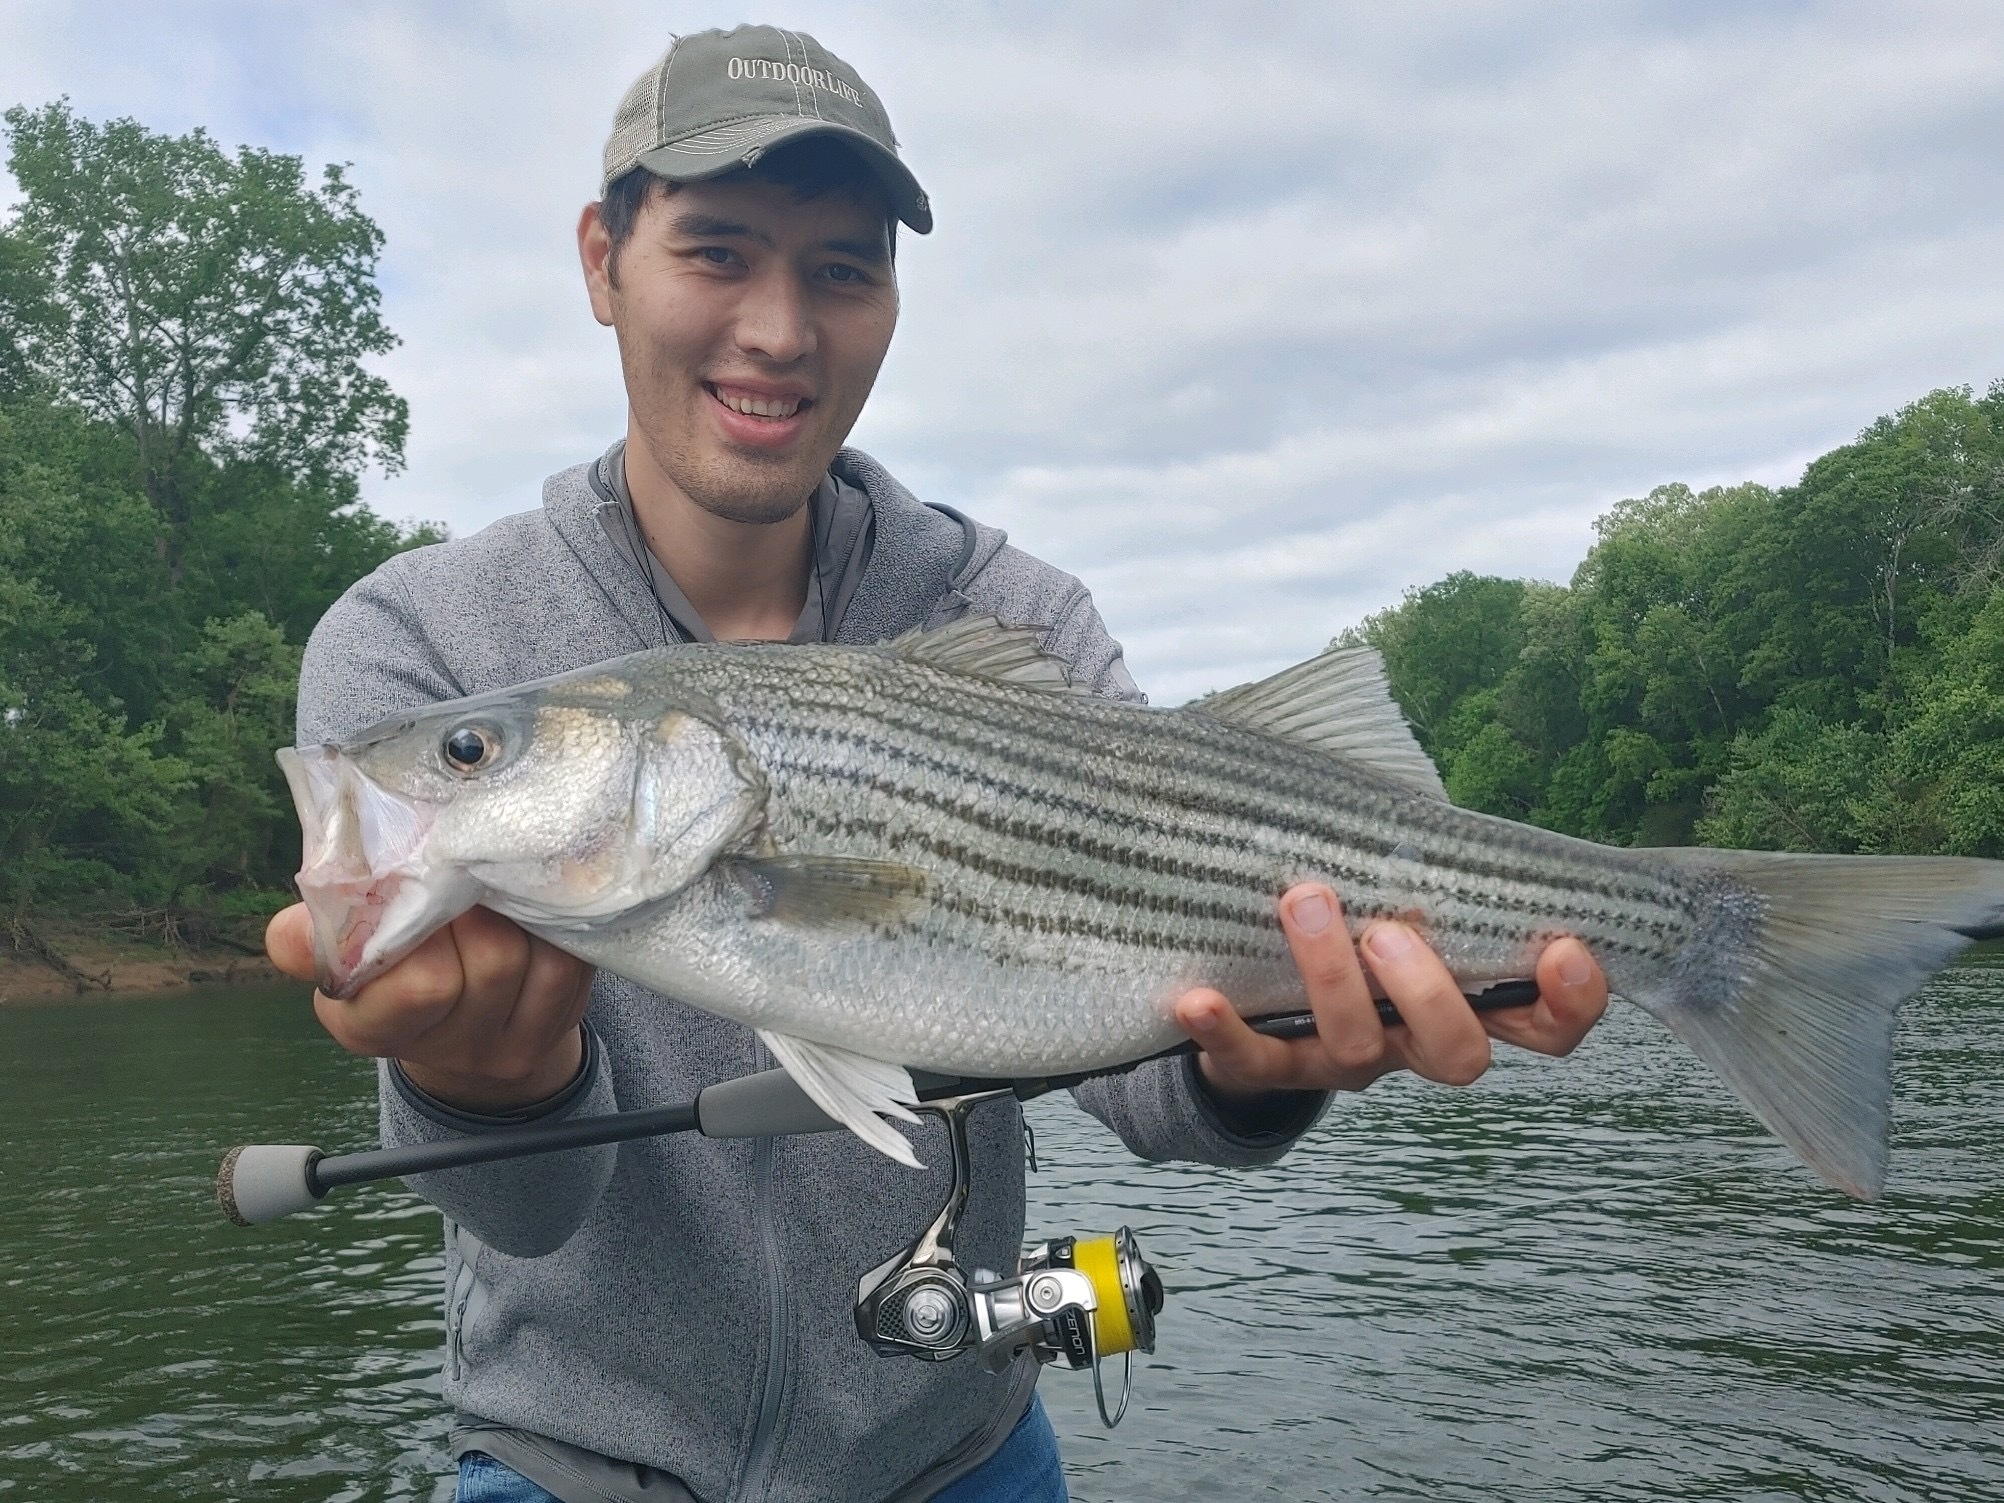 Angler with striped bass